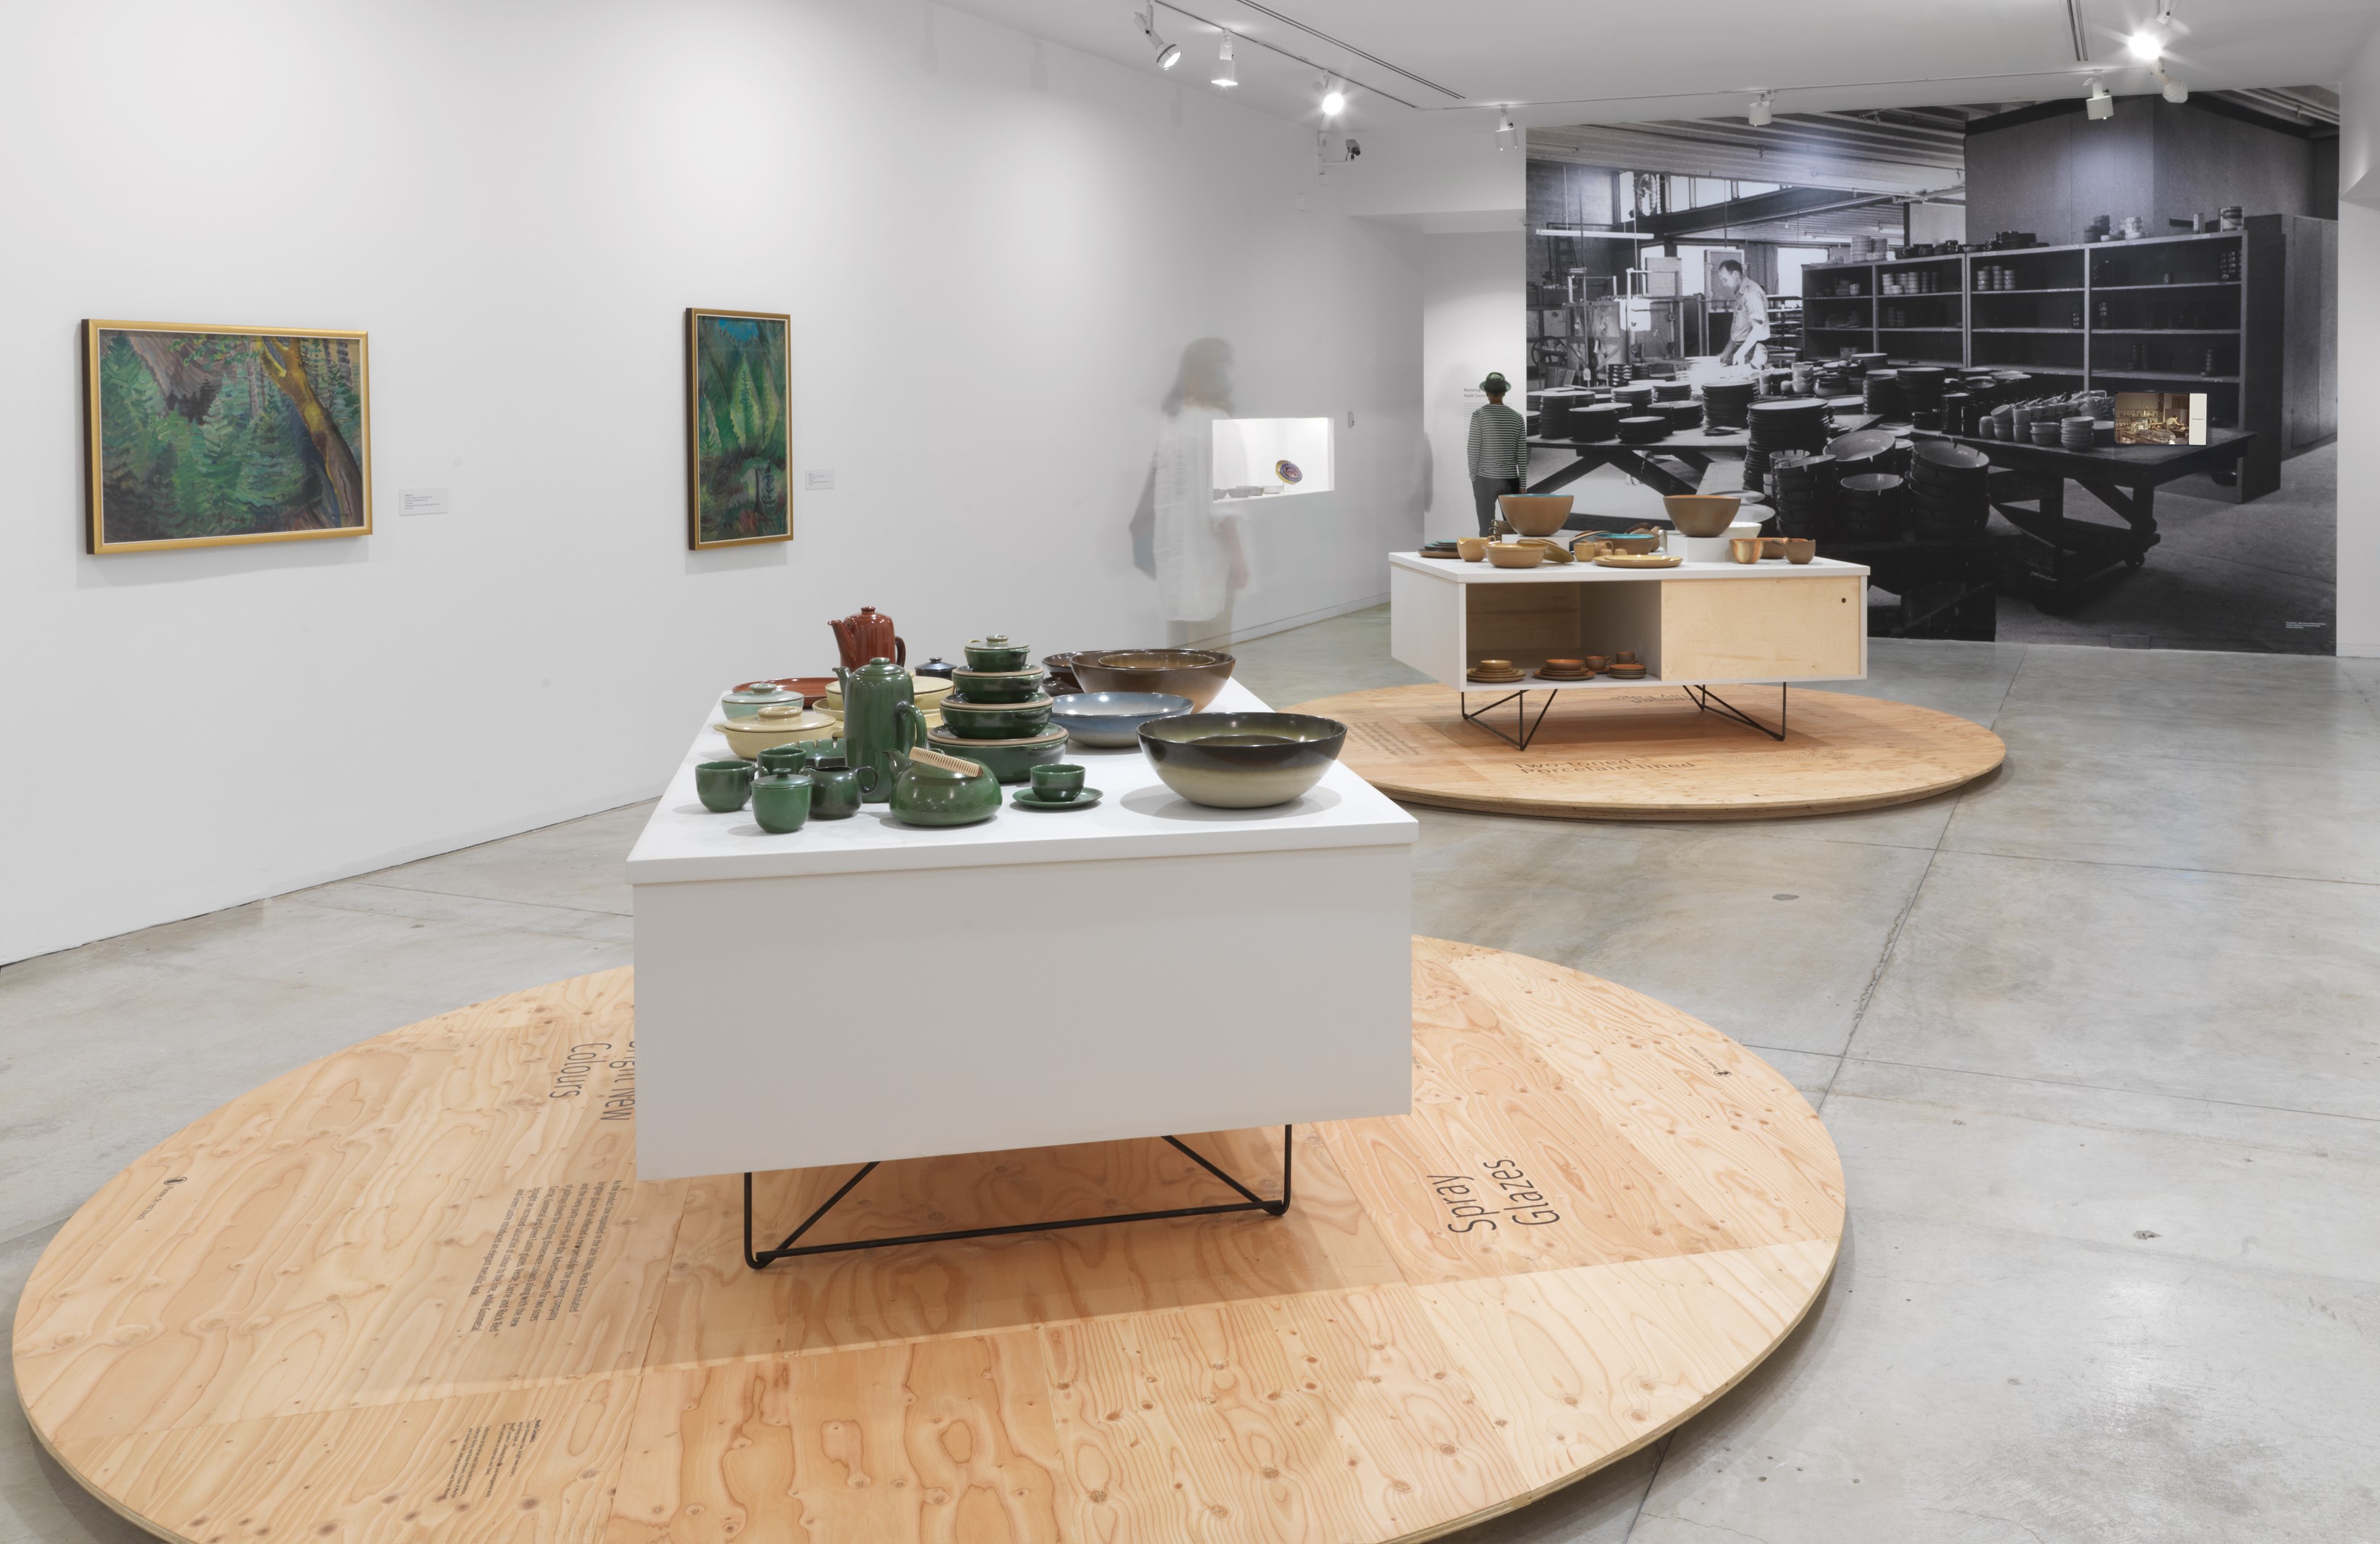 Installation view of the exhibition, with a black and white mural in the background and two cabinets holding ceramic pieces in several colours.